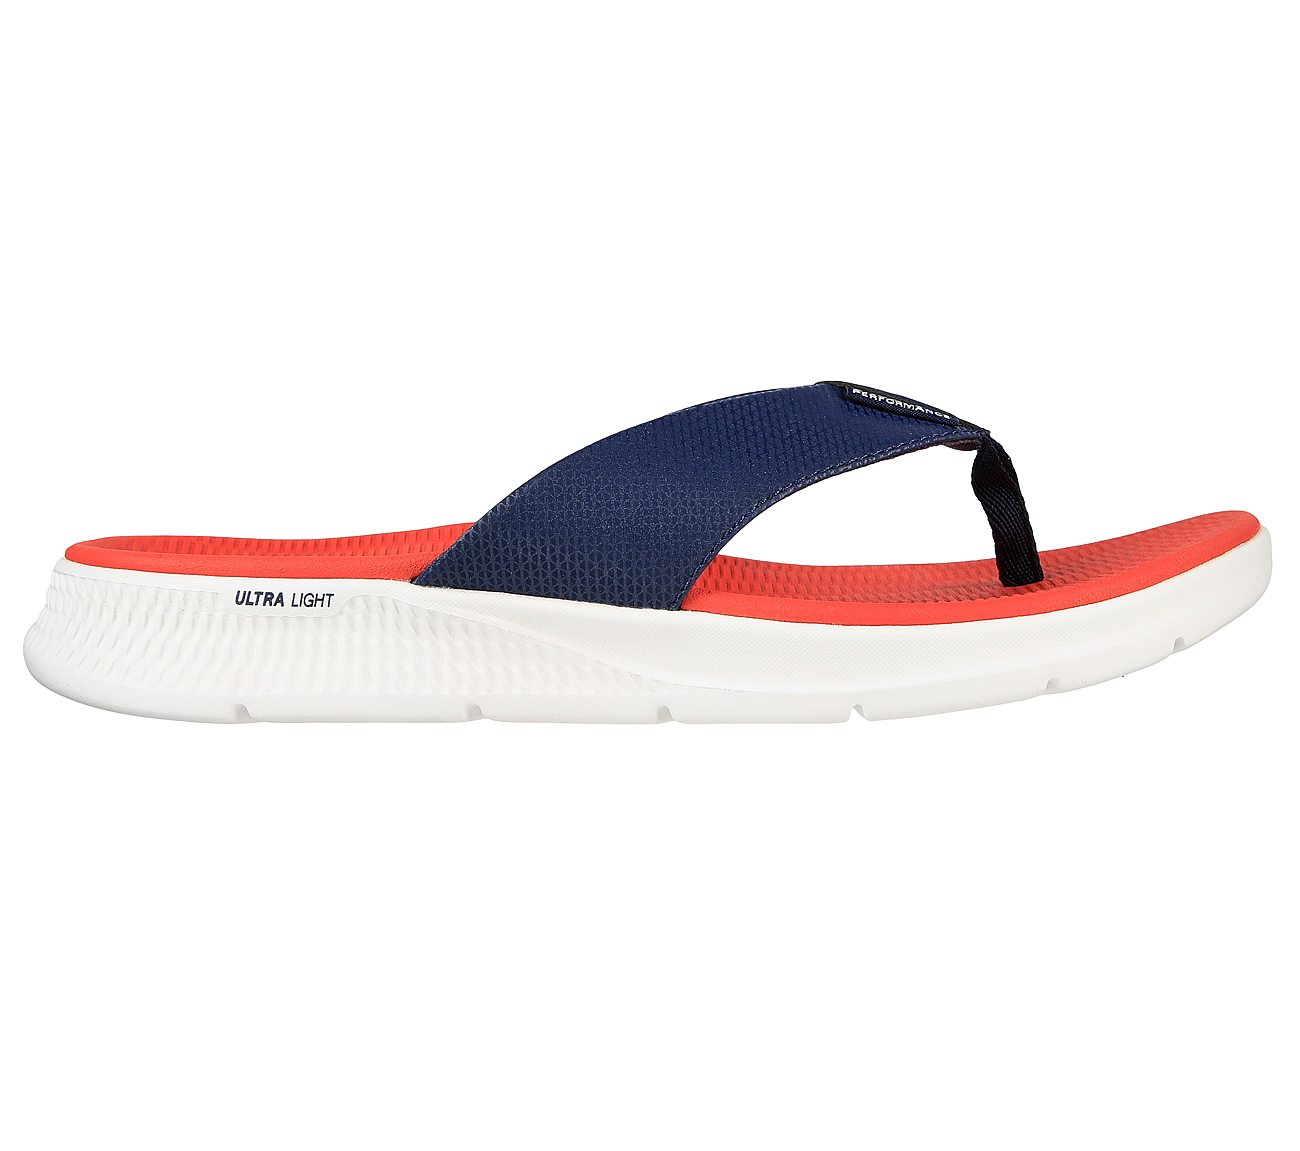 GO CONSISTENT SANDAL-SYNTHWAV, NAVY/RED Footwear Right View